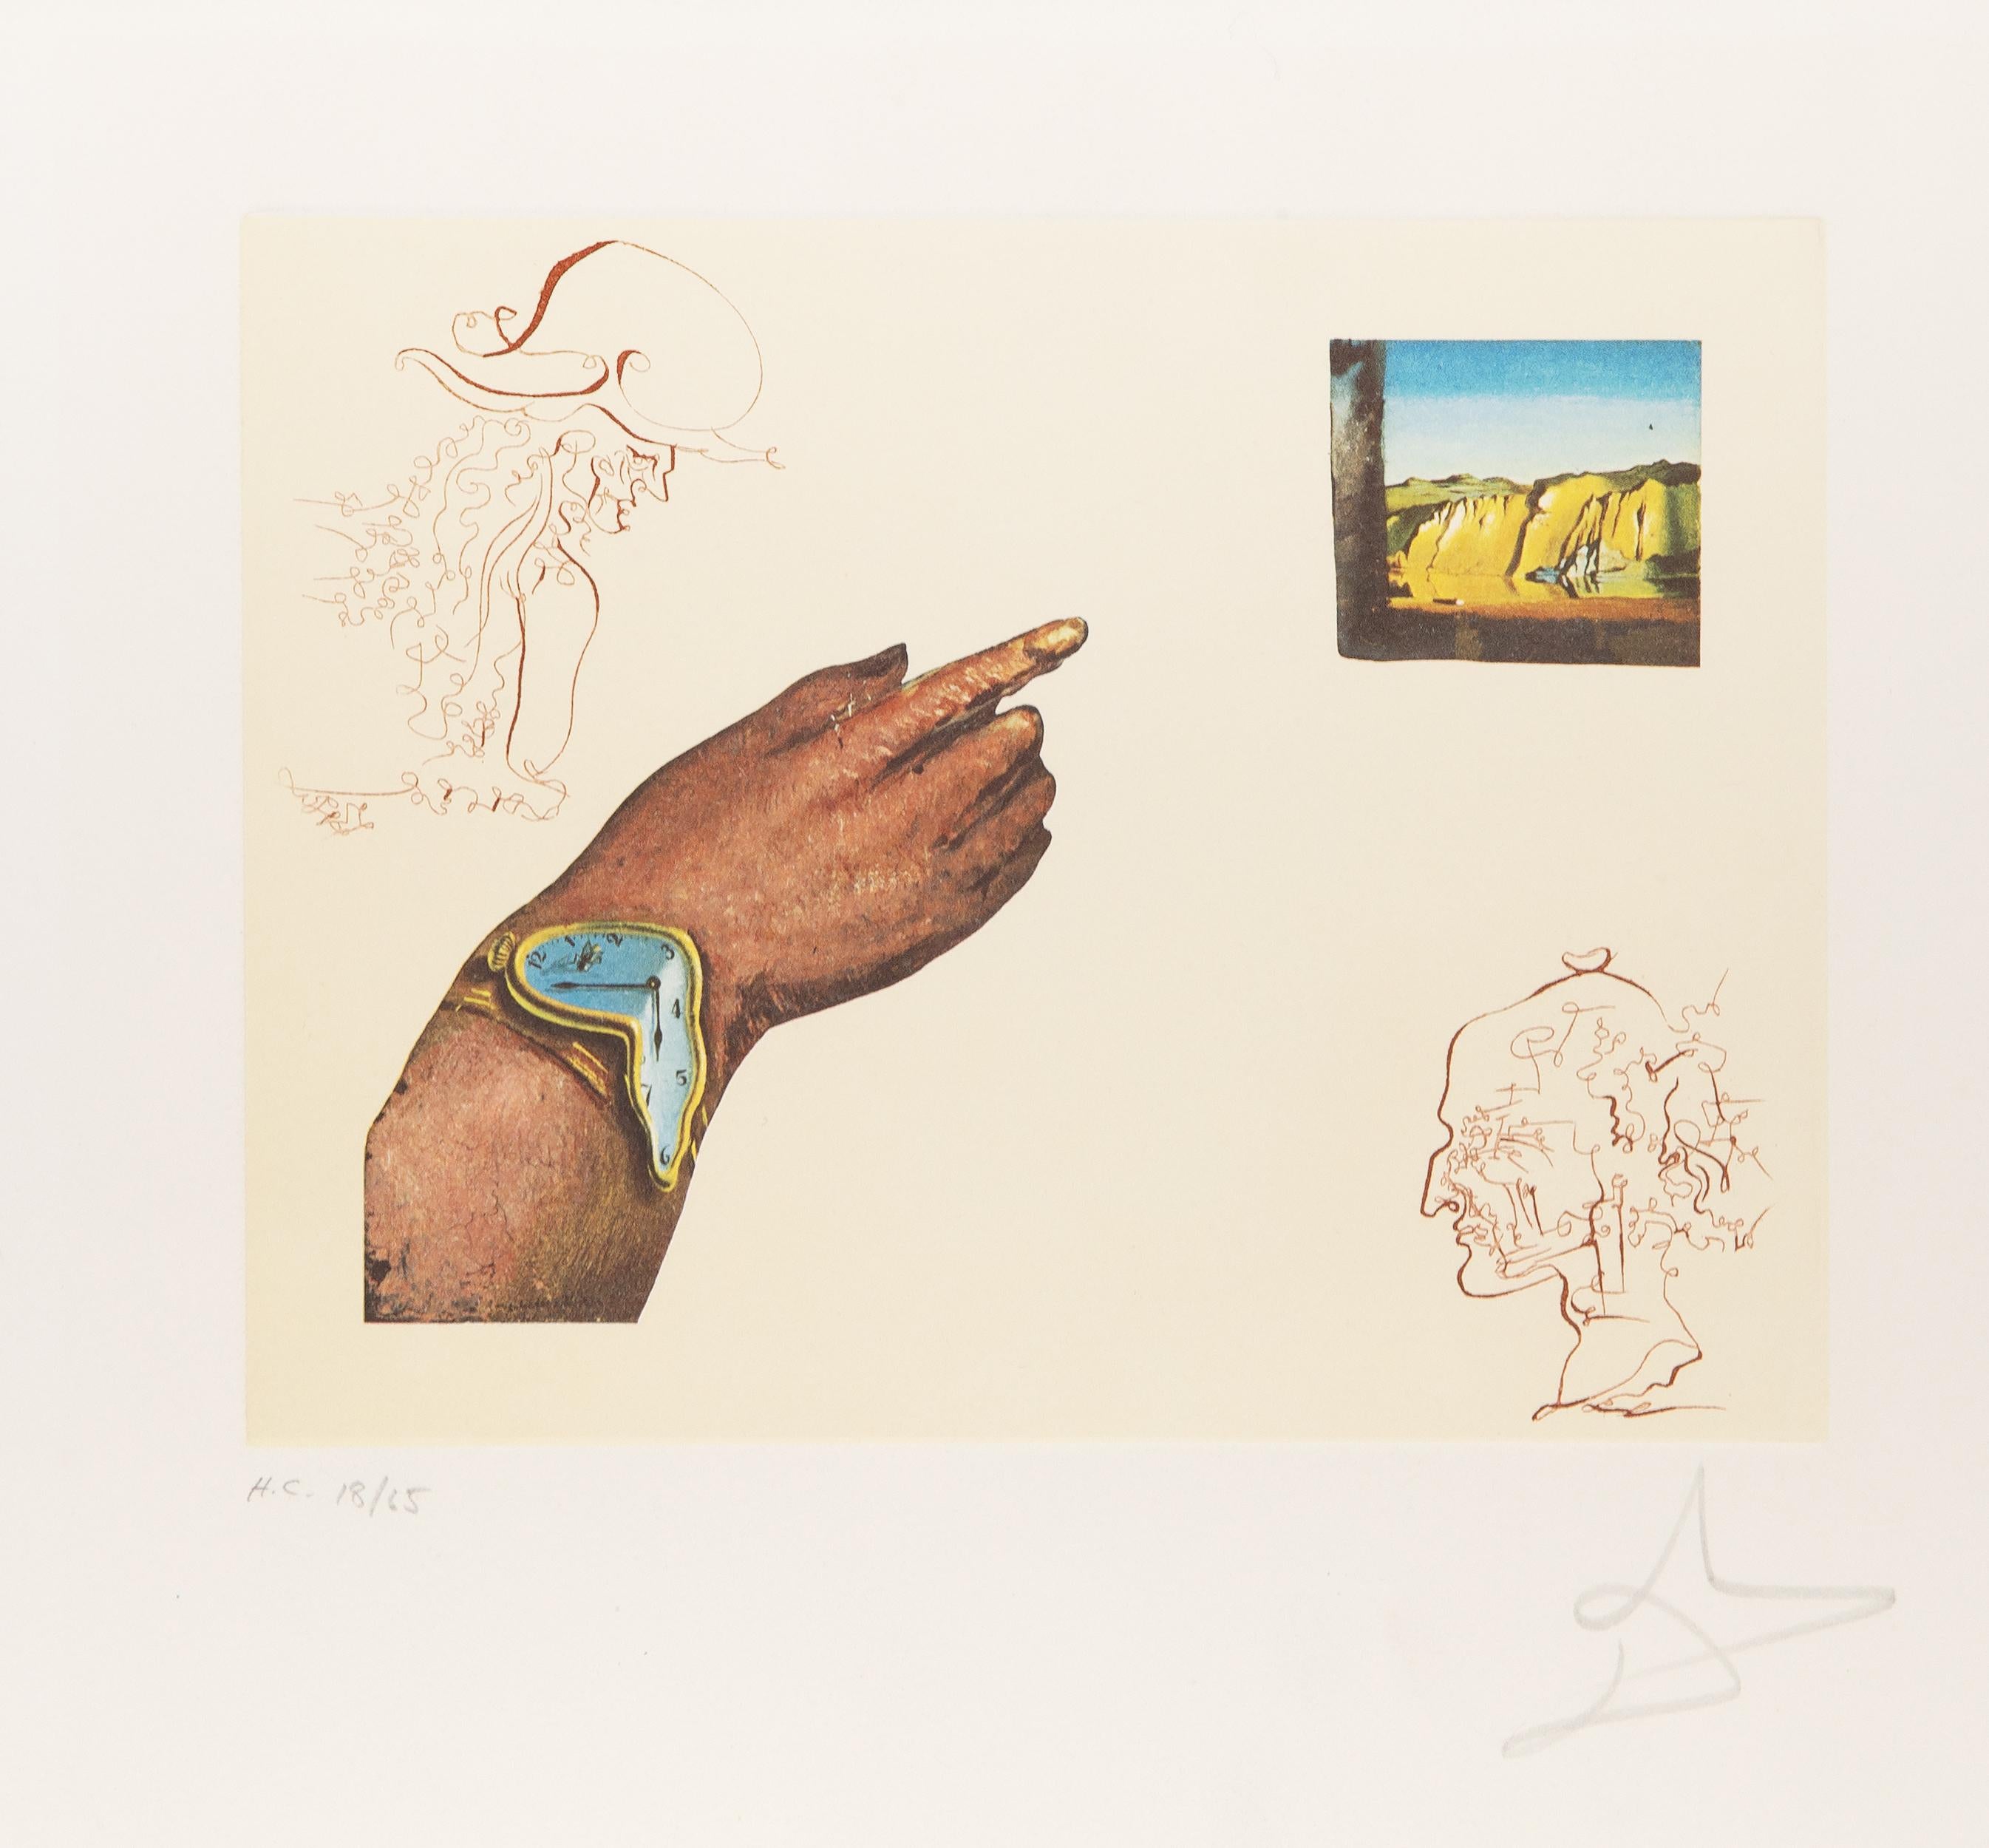 Salvador Dalí Landscape Print - Reflection from the Cycles of Life, Lithograph and Etching by Salvador Dali